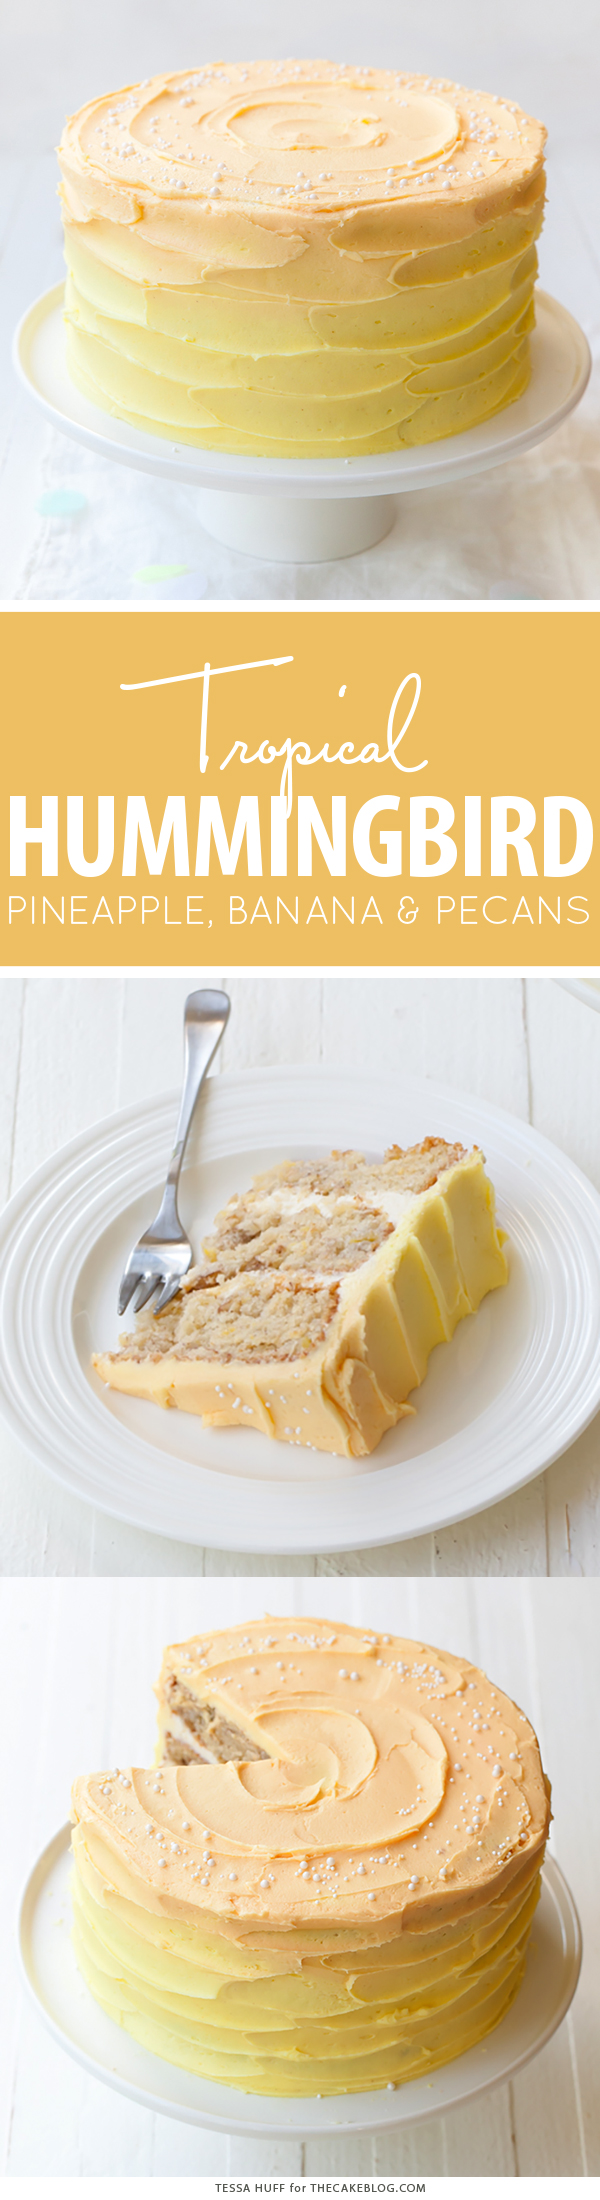 Hummingbird Cake - a no fuss favorite with tropical flavors of pineapple, banana and pecans making it the perfect summer bake | by Tessa Huff for TheCakeBlog.com